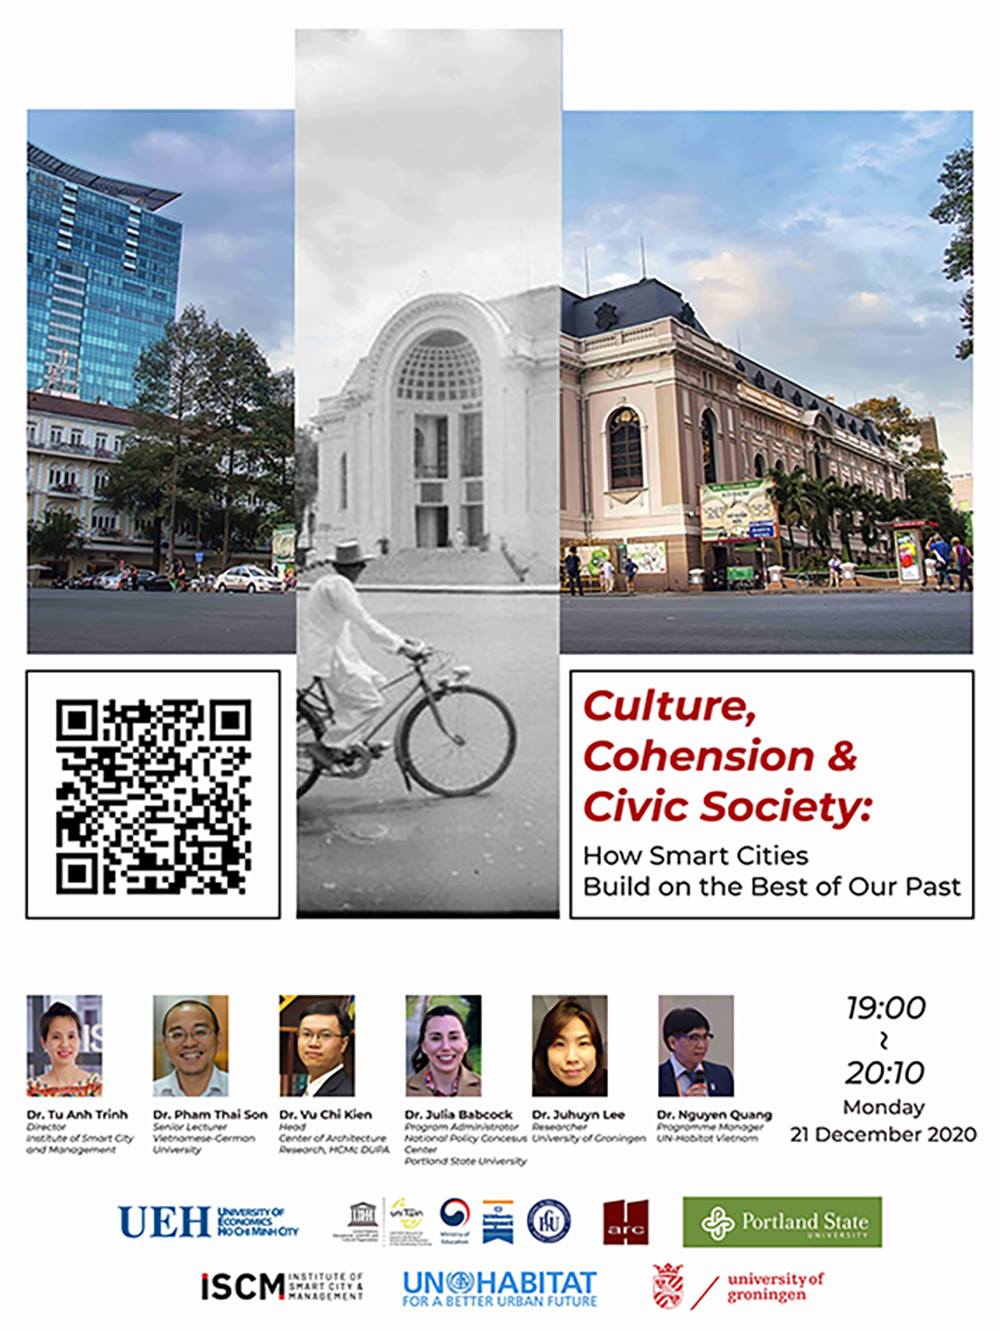 Culture, Cohesion and Civic Society: How Smart Cities Build on the Best of Our Past?